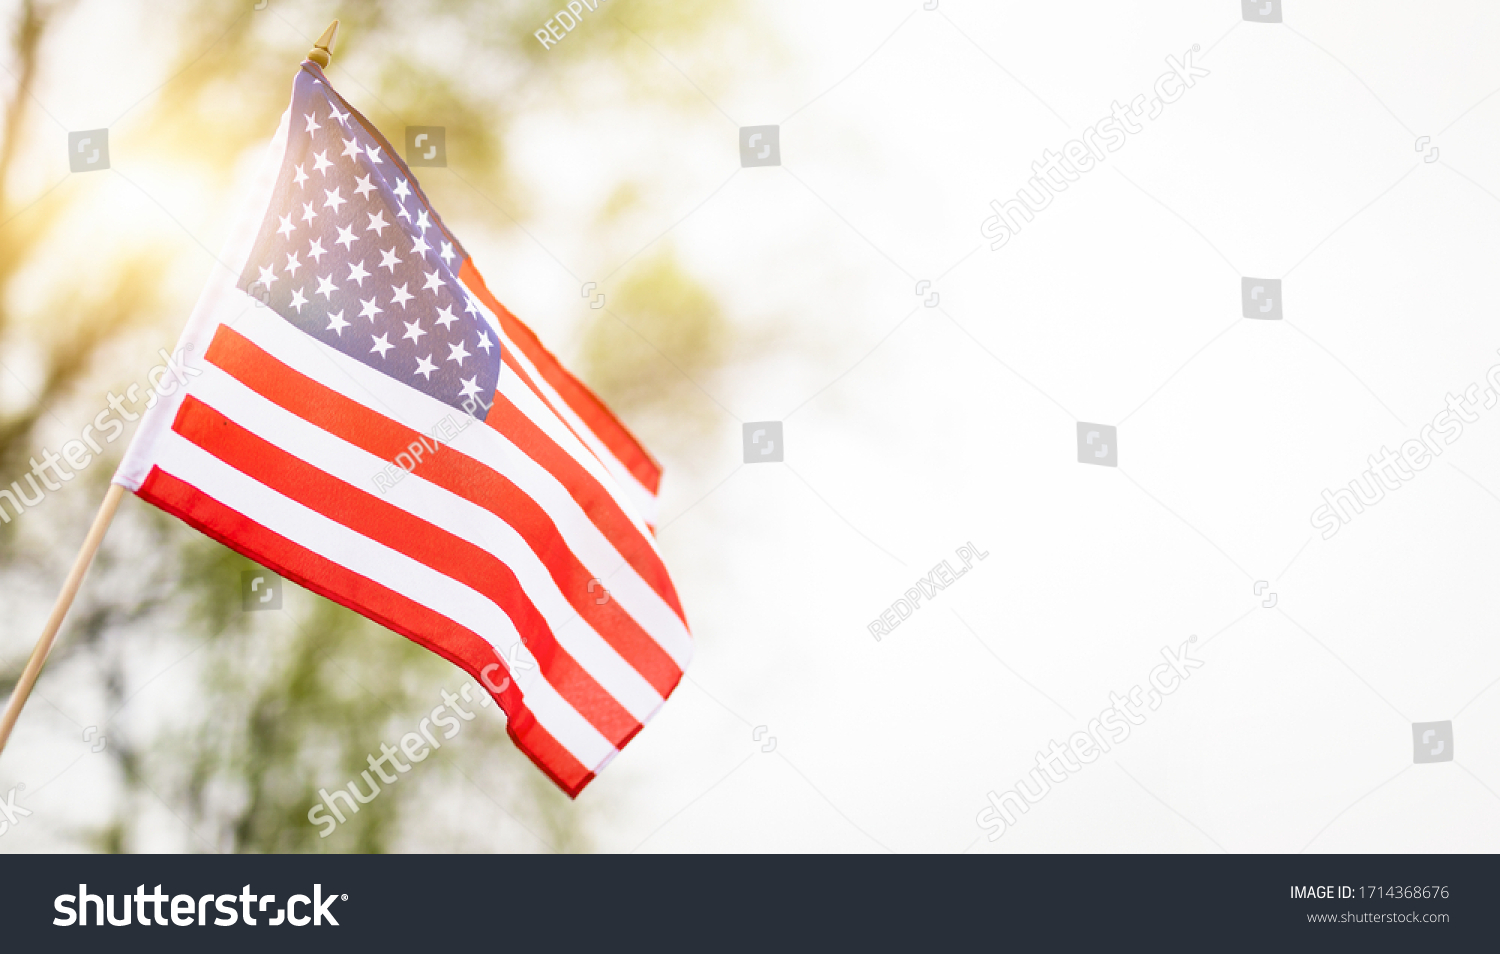 American flag for Memorial Day, 4th of July, Labour Day. Independence Day. #1714368676